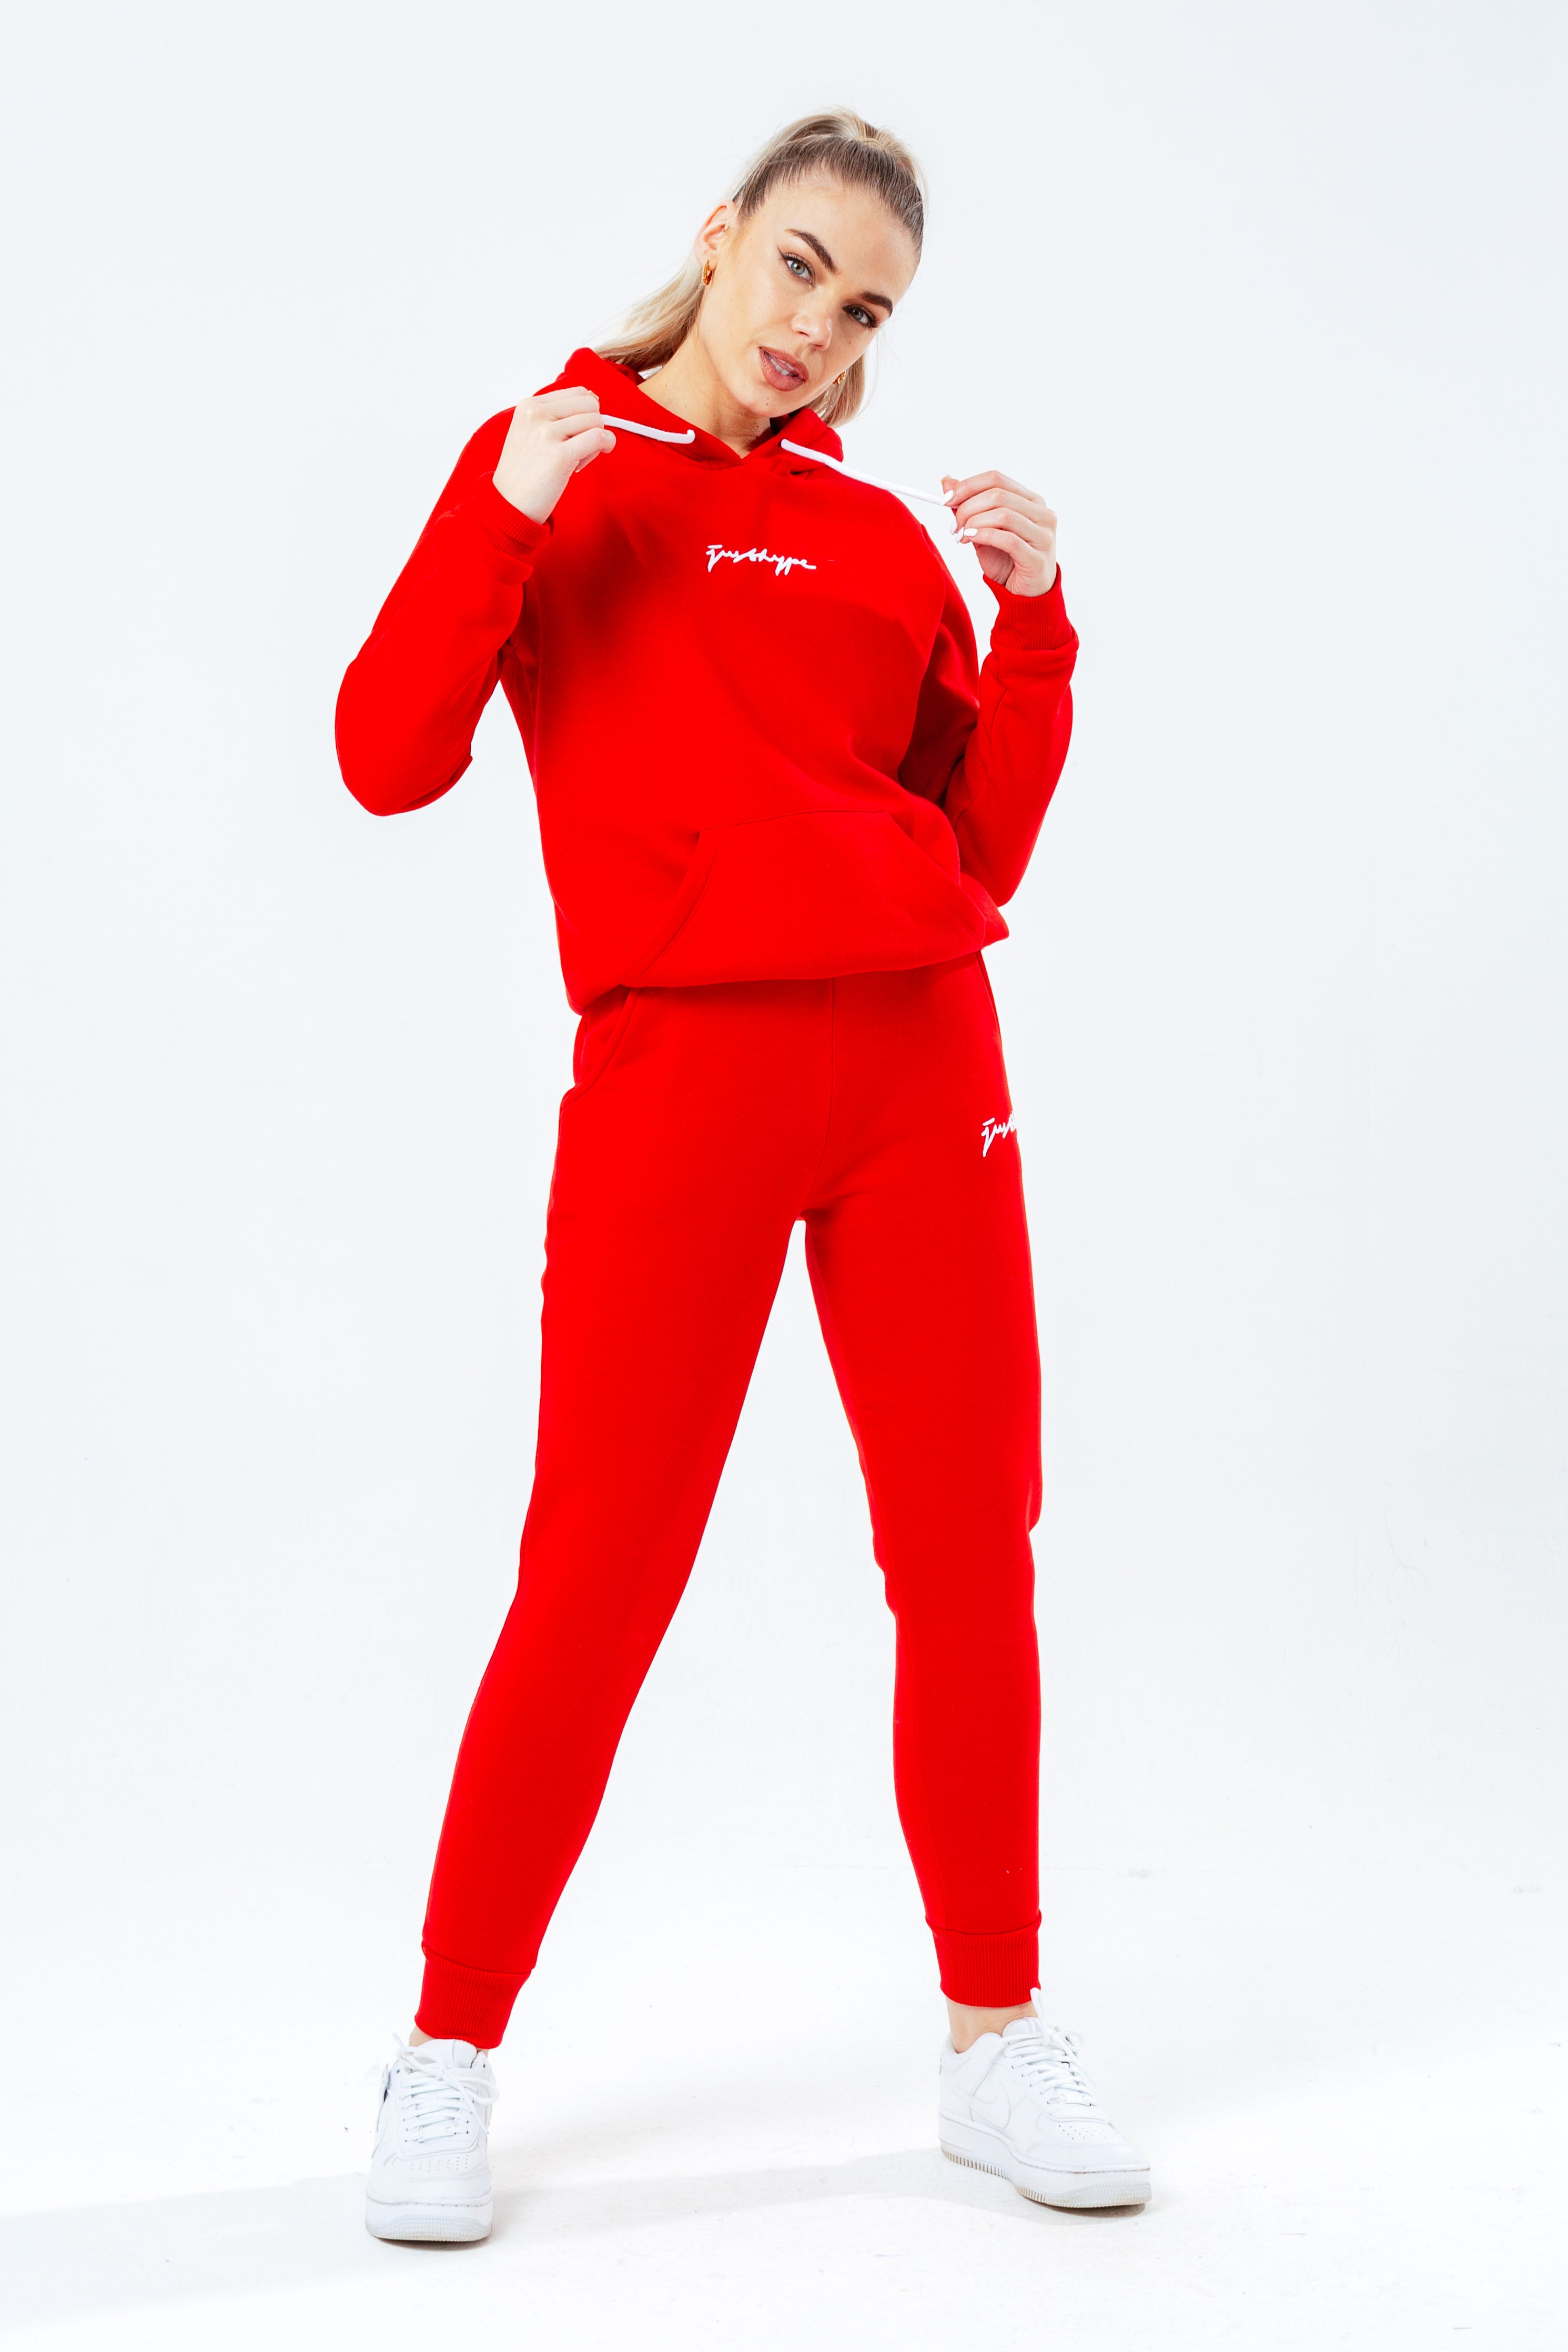 HYPE RED SCRIBBLE WOMEN'S TRACKSUIT Hype.